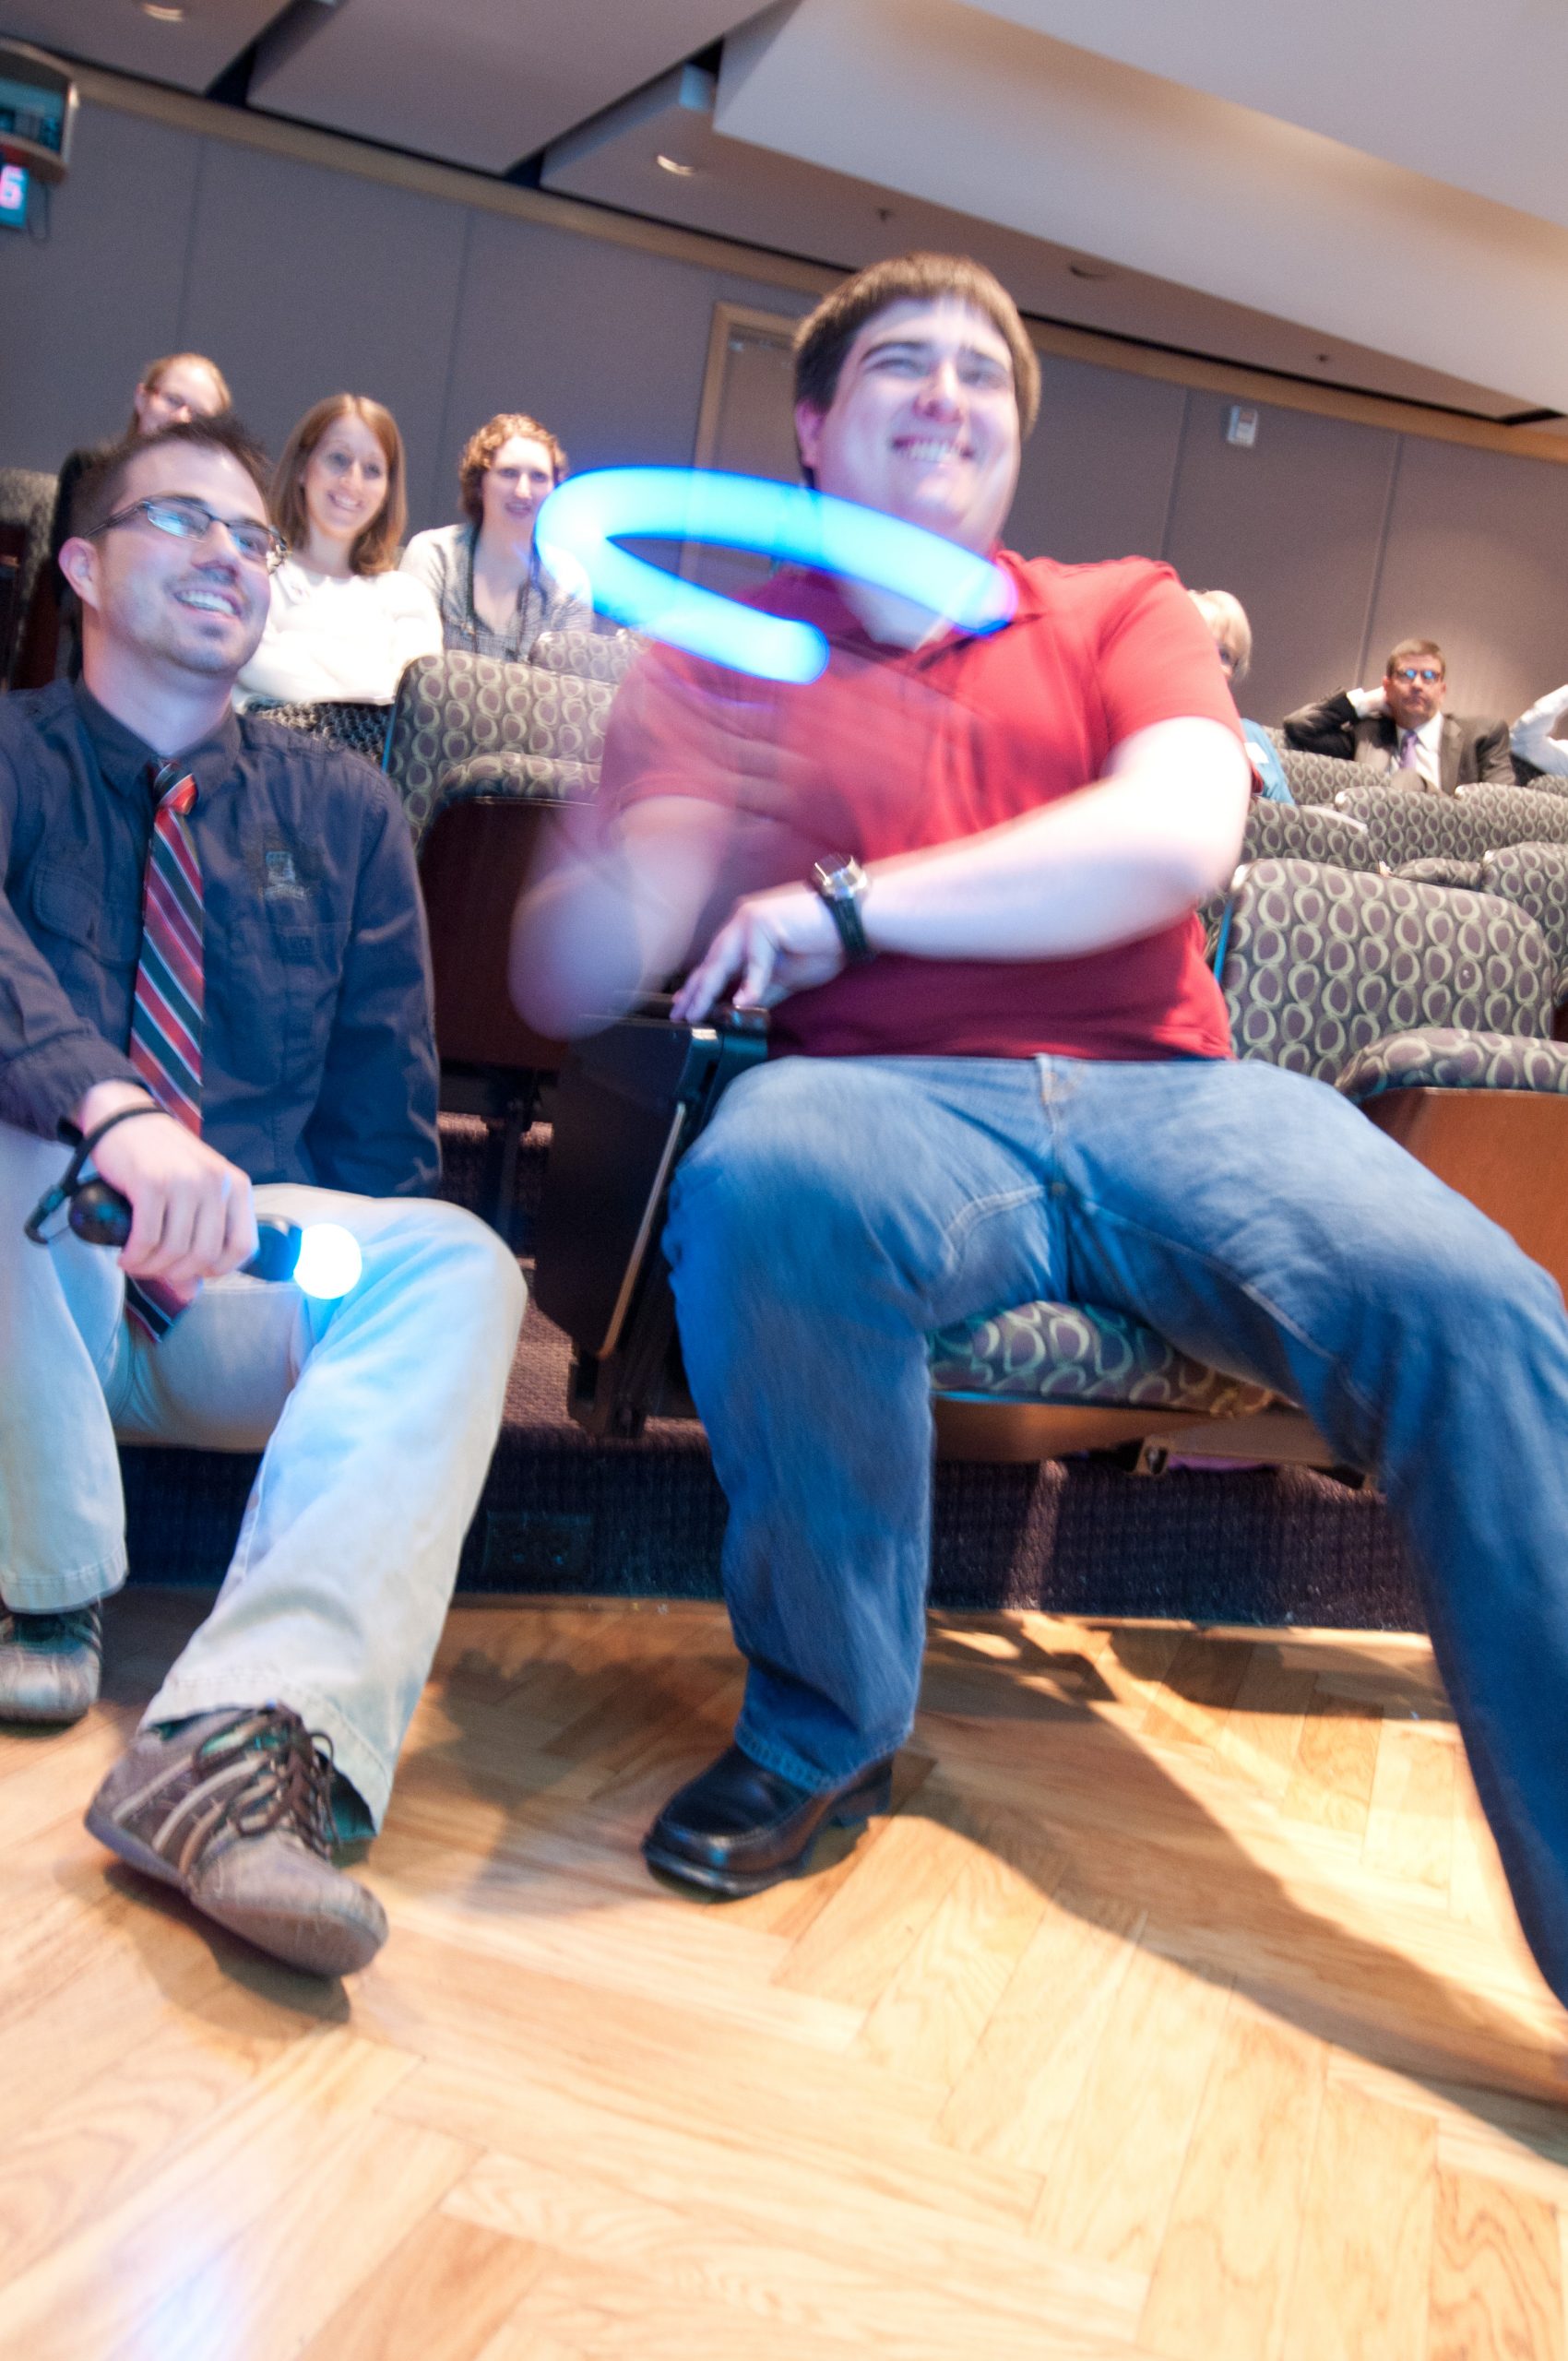 Developers of the PE Interactive Game demonstrate the motion-control technology utilized in a game created at the University of Utah for cancer patients.